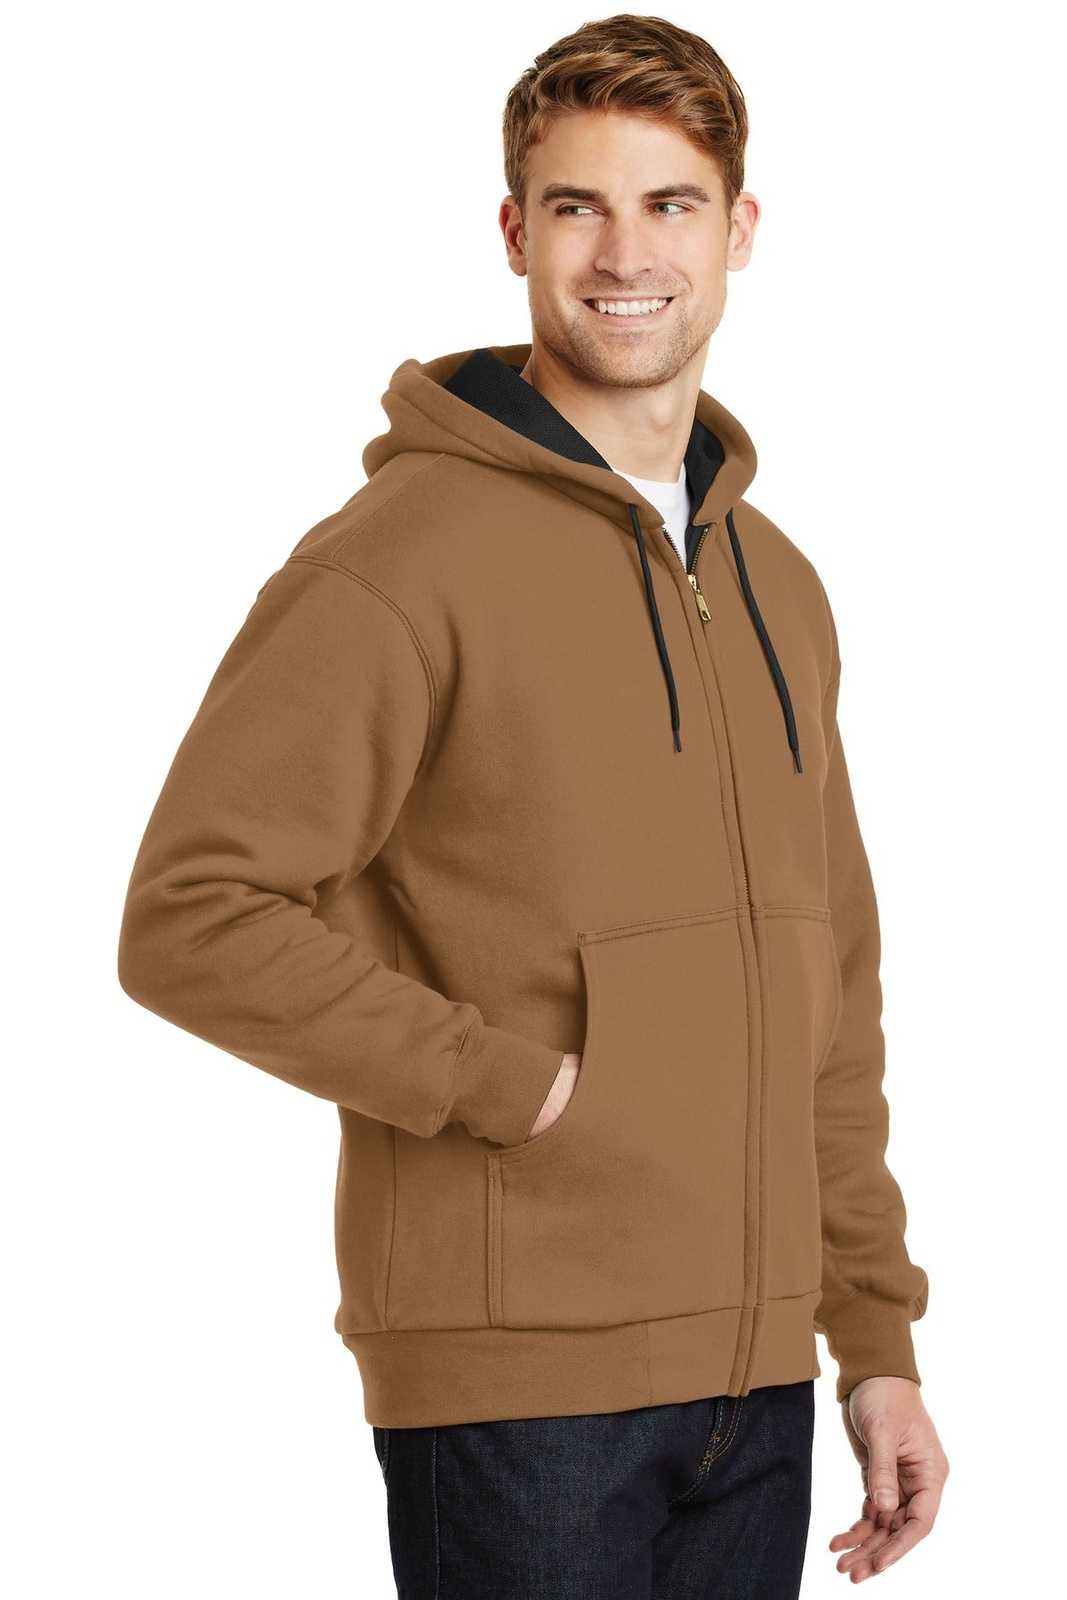 CornerStone CS620 Heavyweight Full-Zip Hooded Sweatshirt with Thermal Lining - Duck Brown - HIT a Double - 4